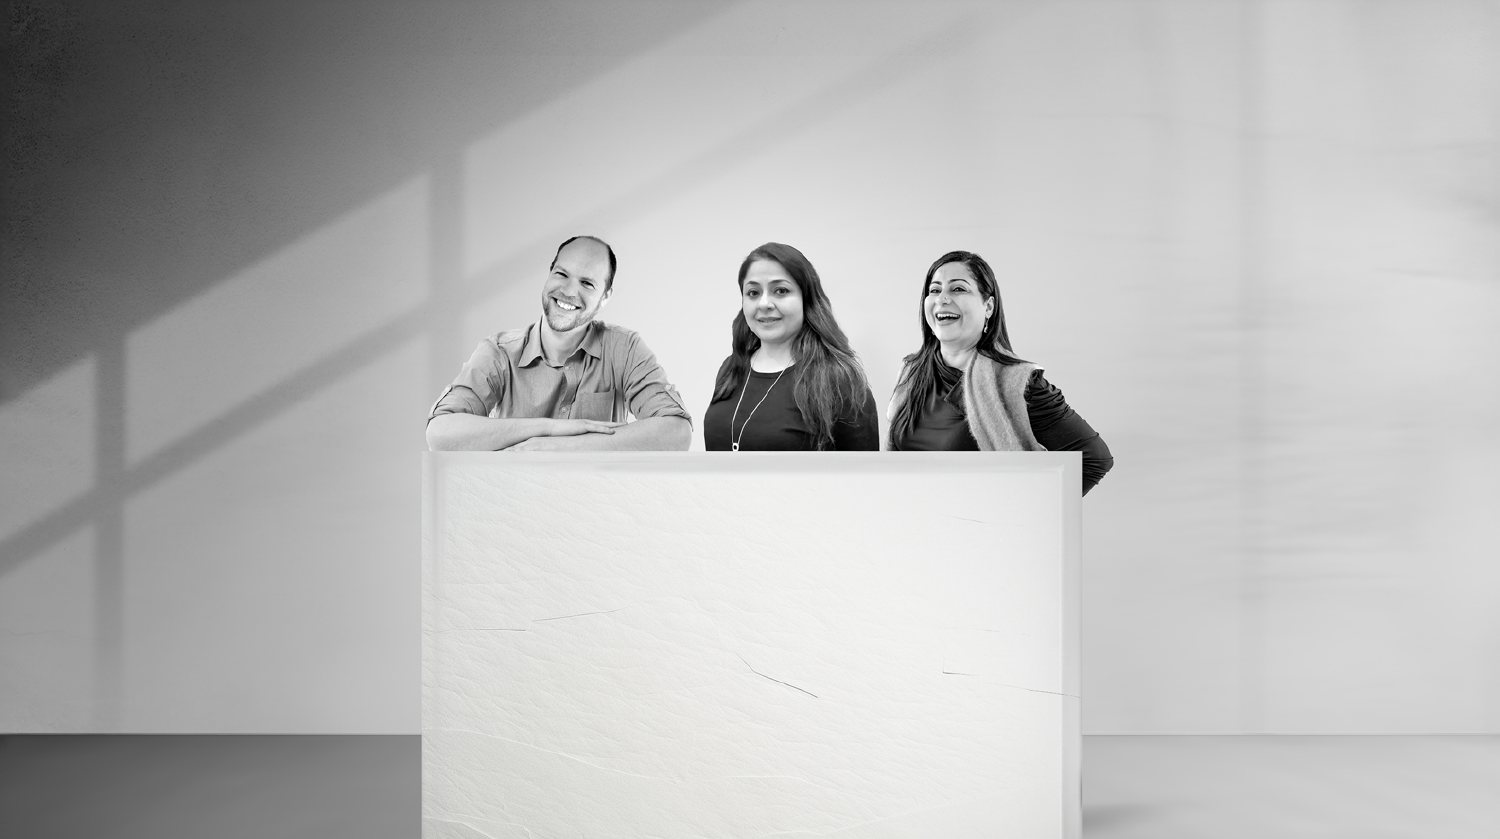 Three smiling professionals standing behind a presentation podium in a black and white office setting.